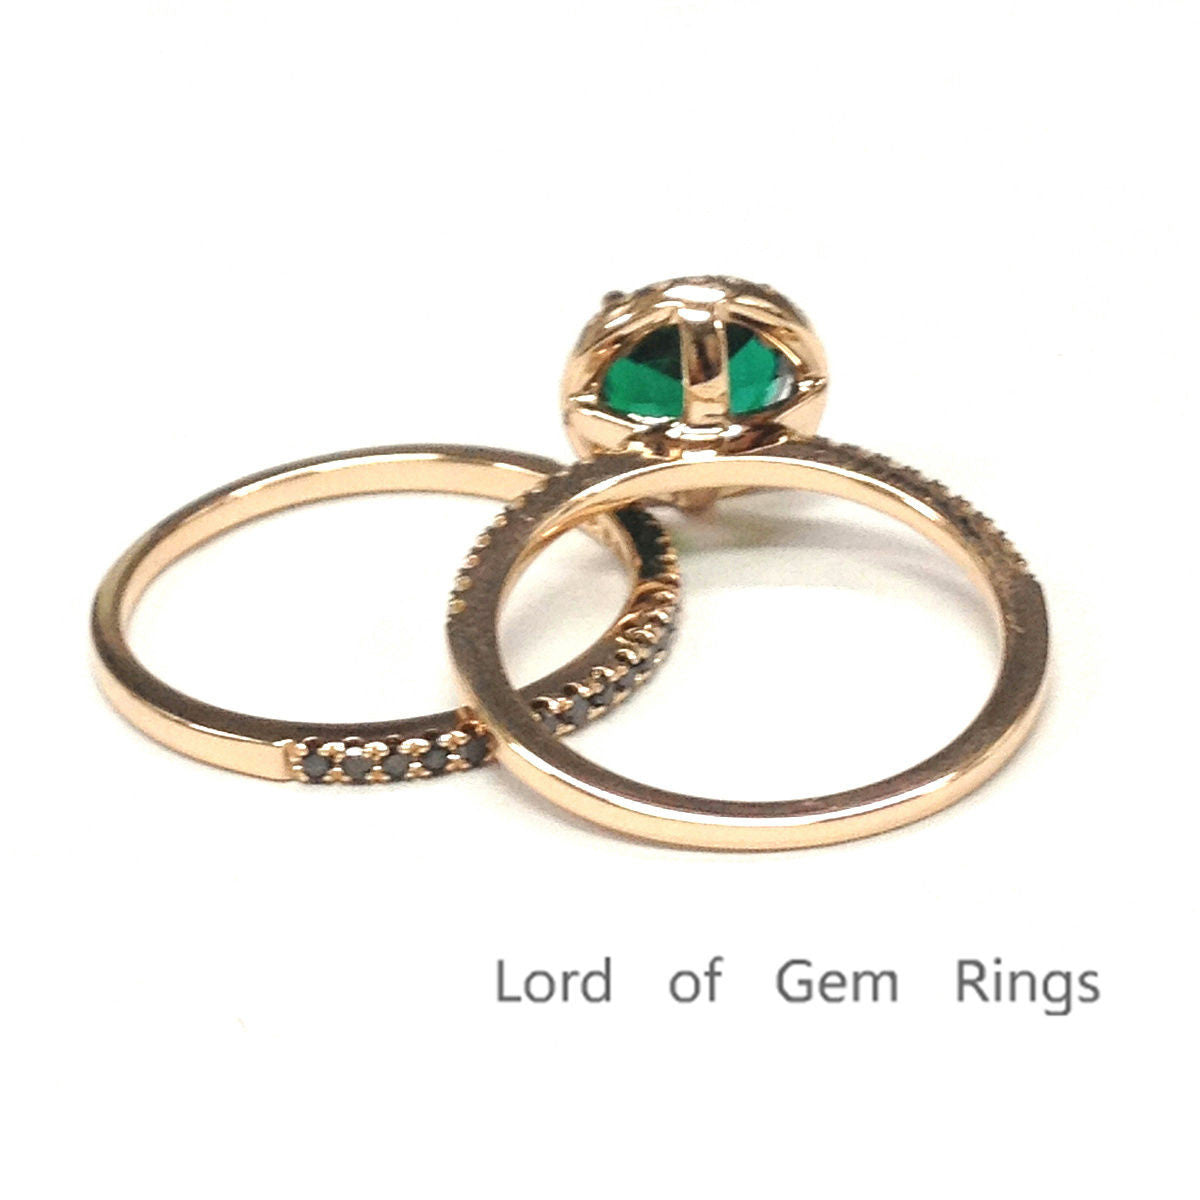 Round Emerald Engagement Ring Sets Pave Black Diamond Wedding Band 14K Rose Gold 7mm - Lord of Gem Rings - 2